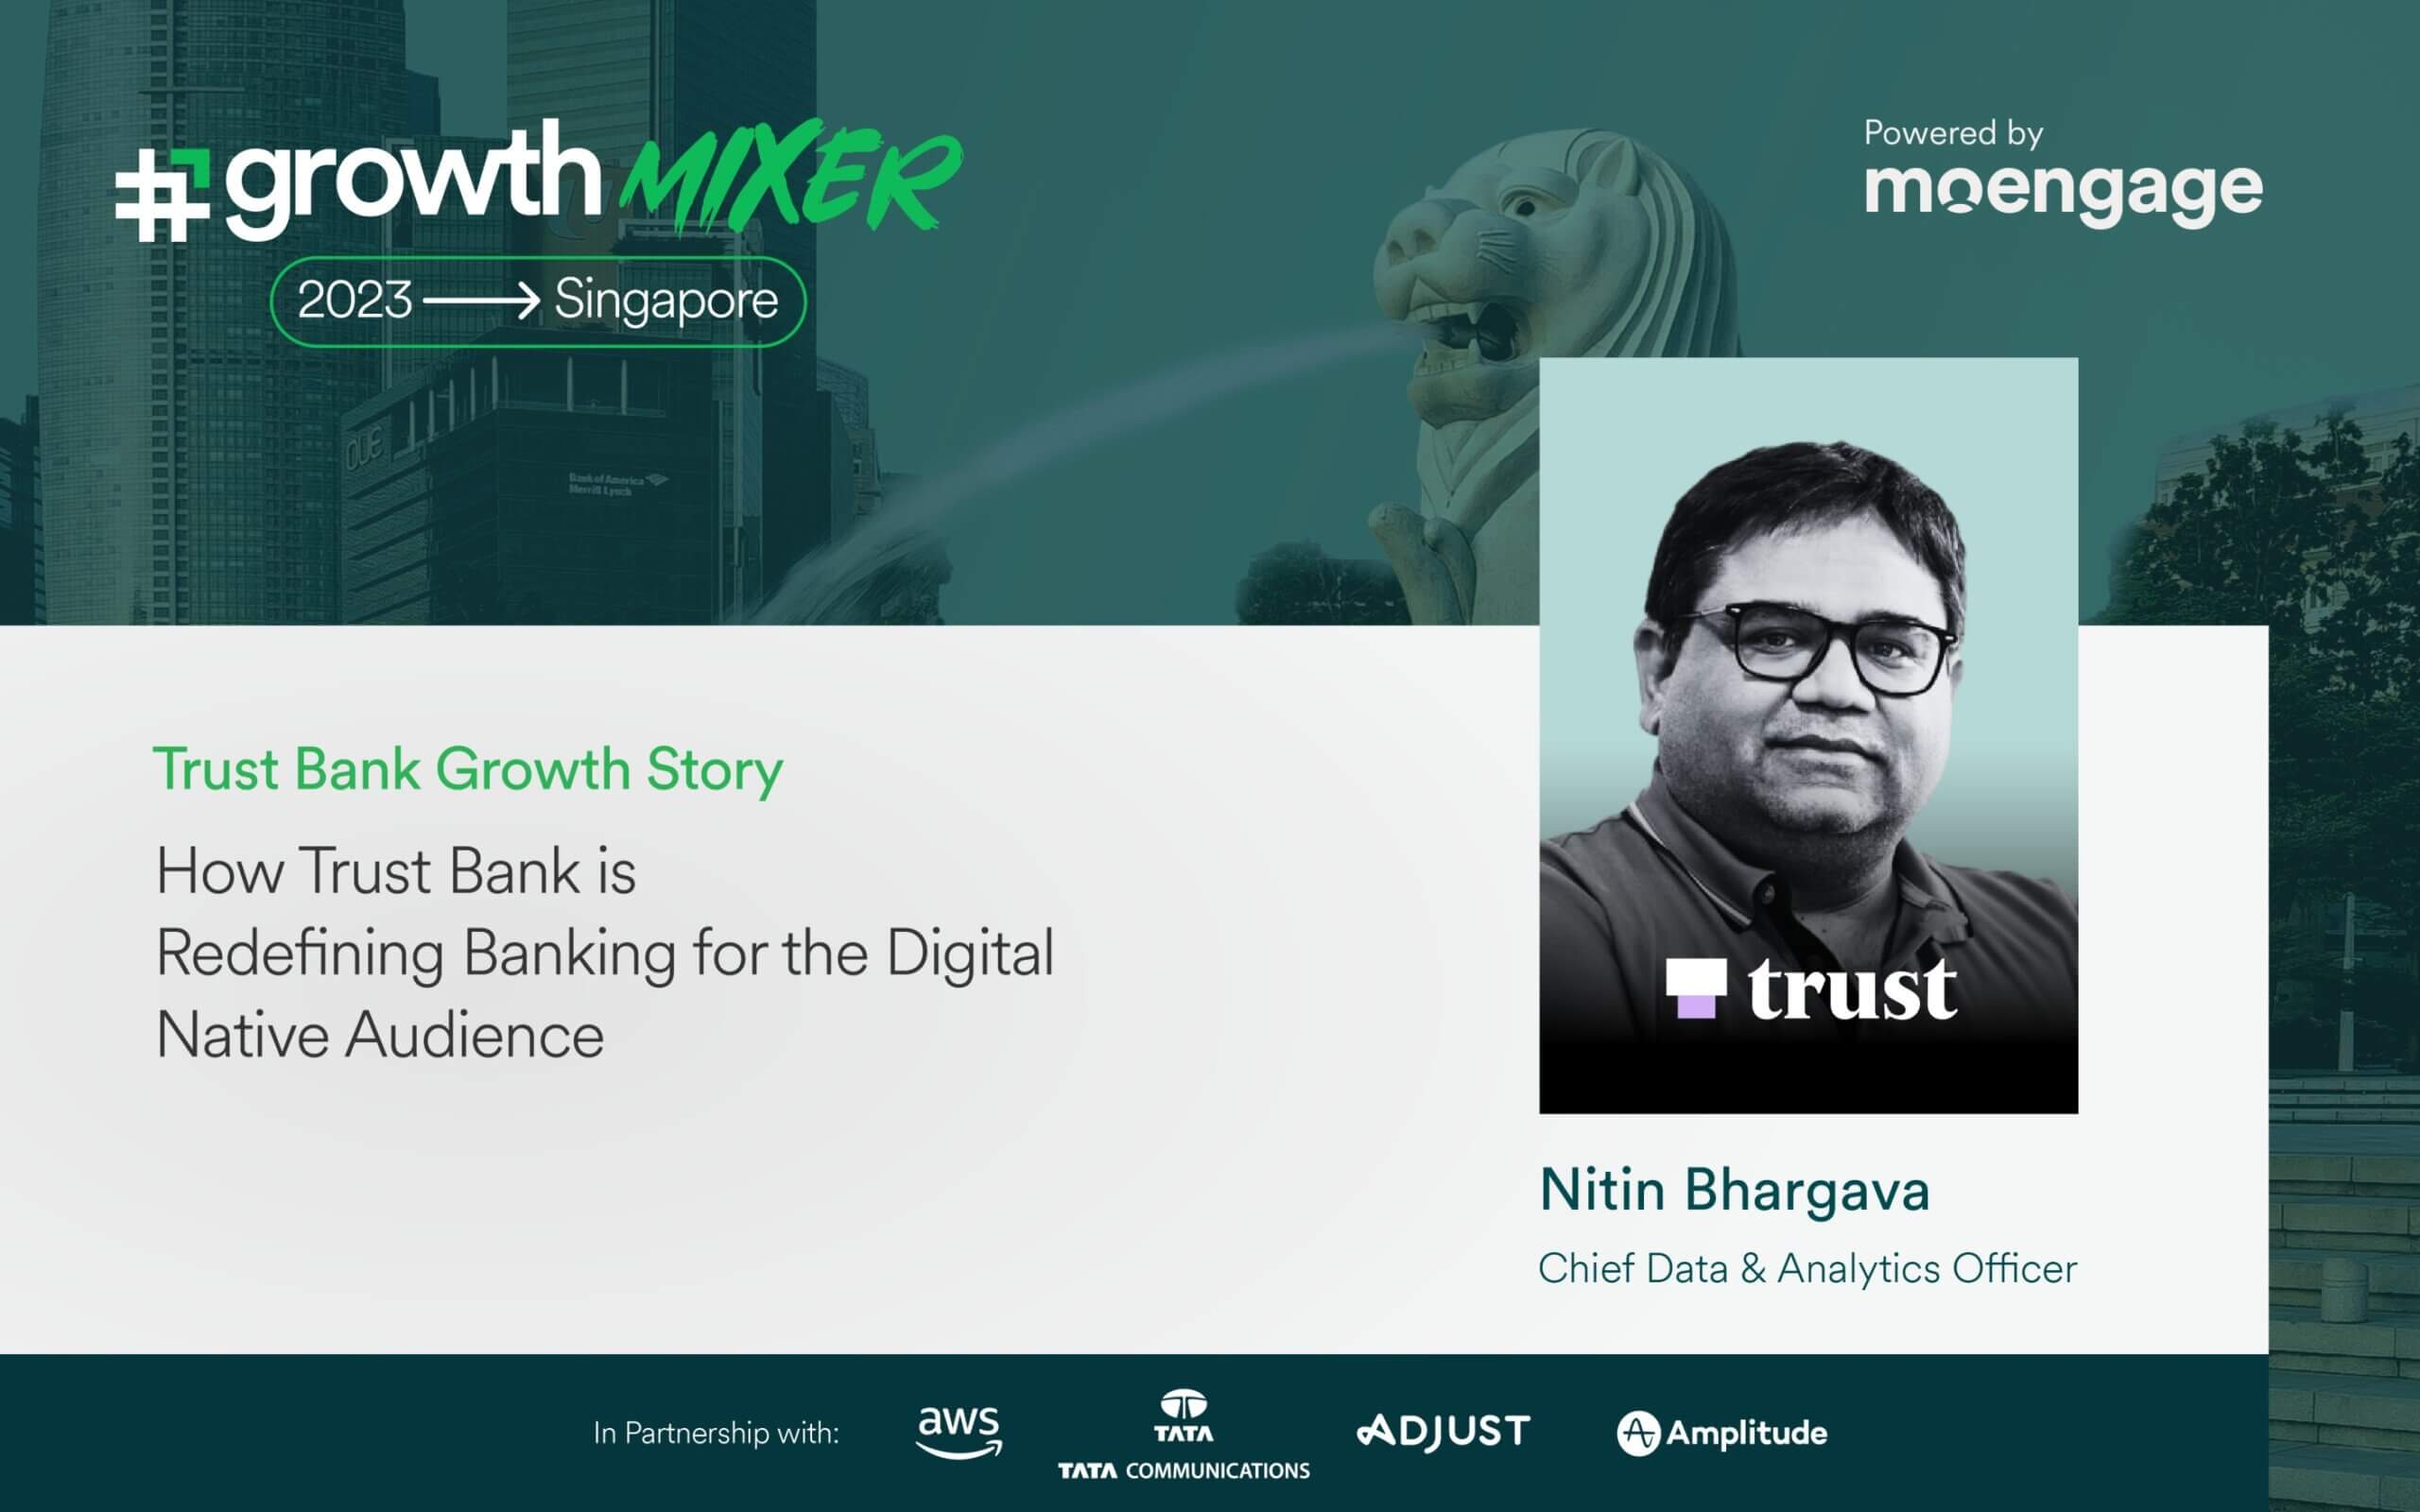 How Trust Bank is Redefining Banking for the Digital Native Audience